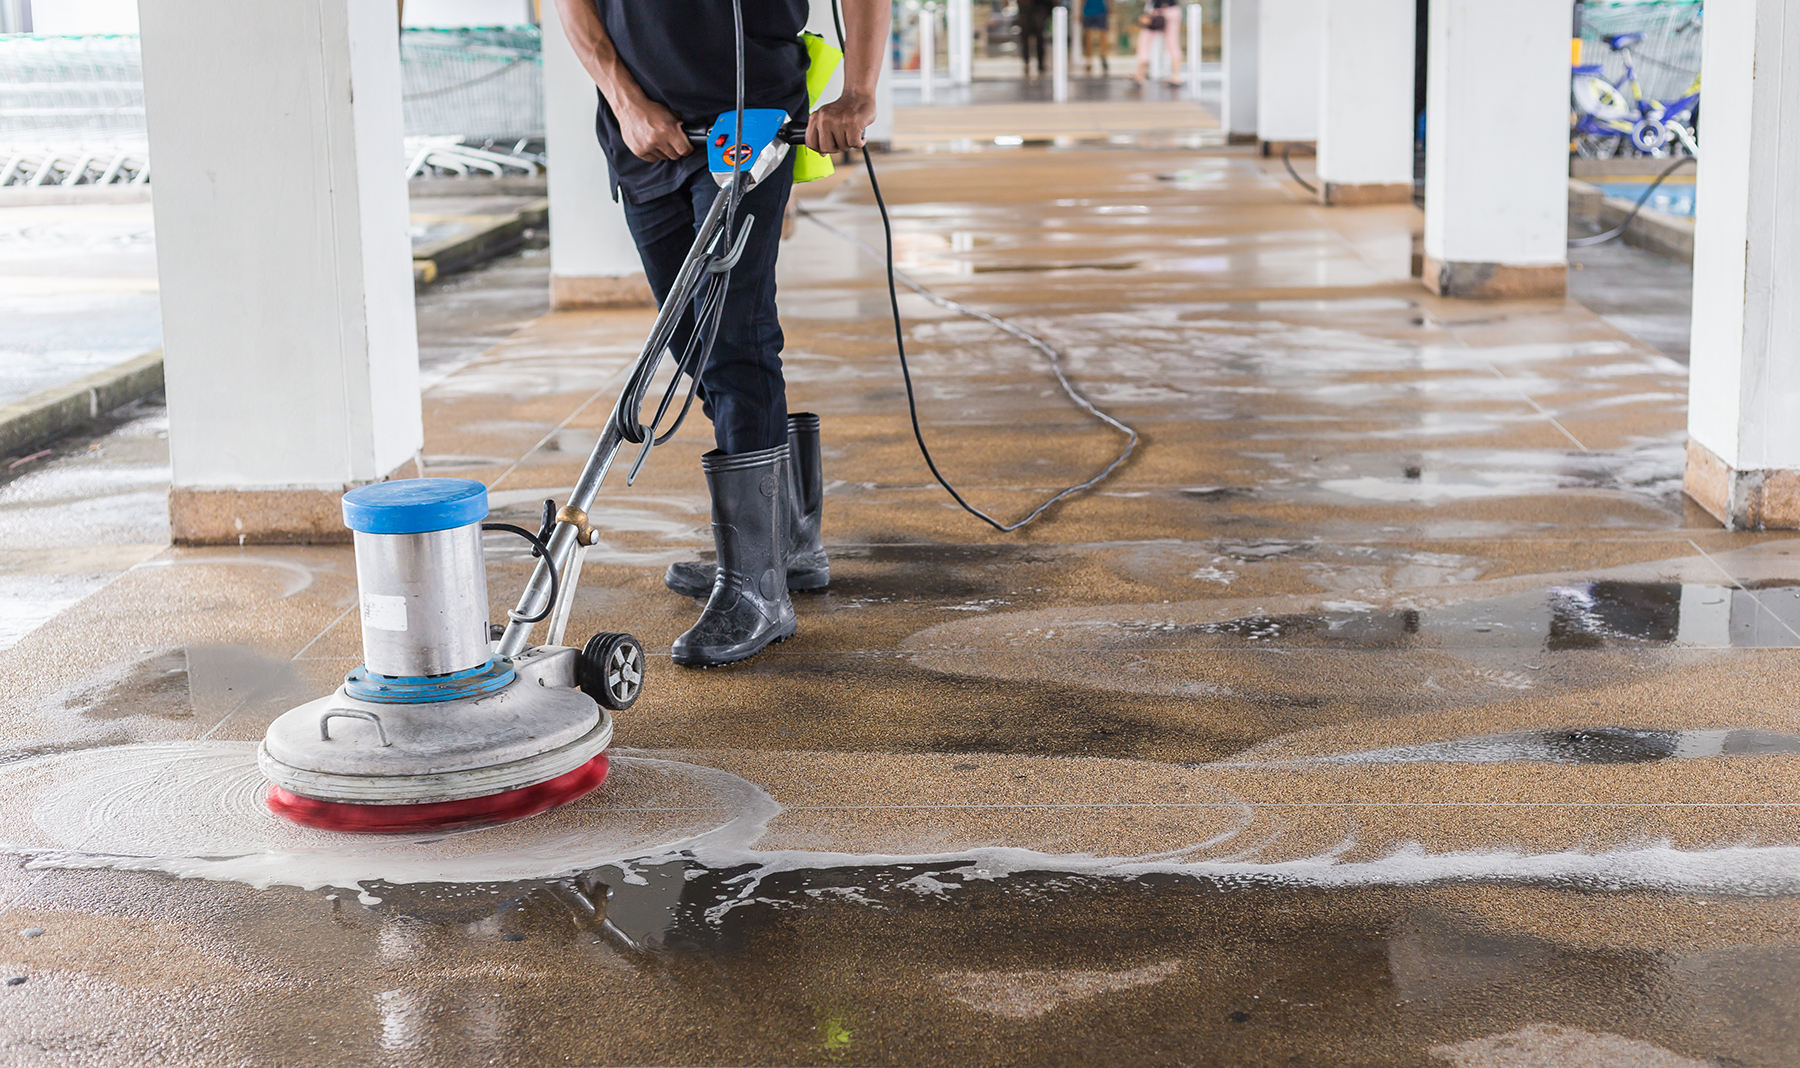 commercial-pressure-cleaning-services-by-call-sun-city-in-palm-city